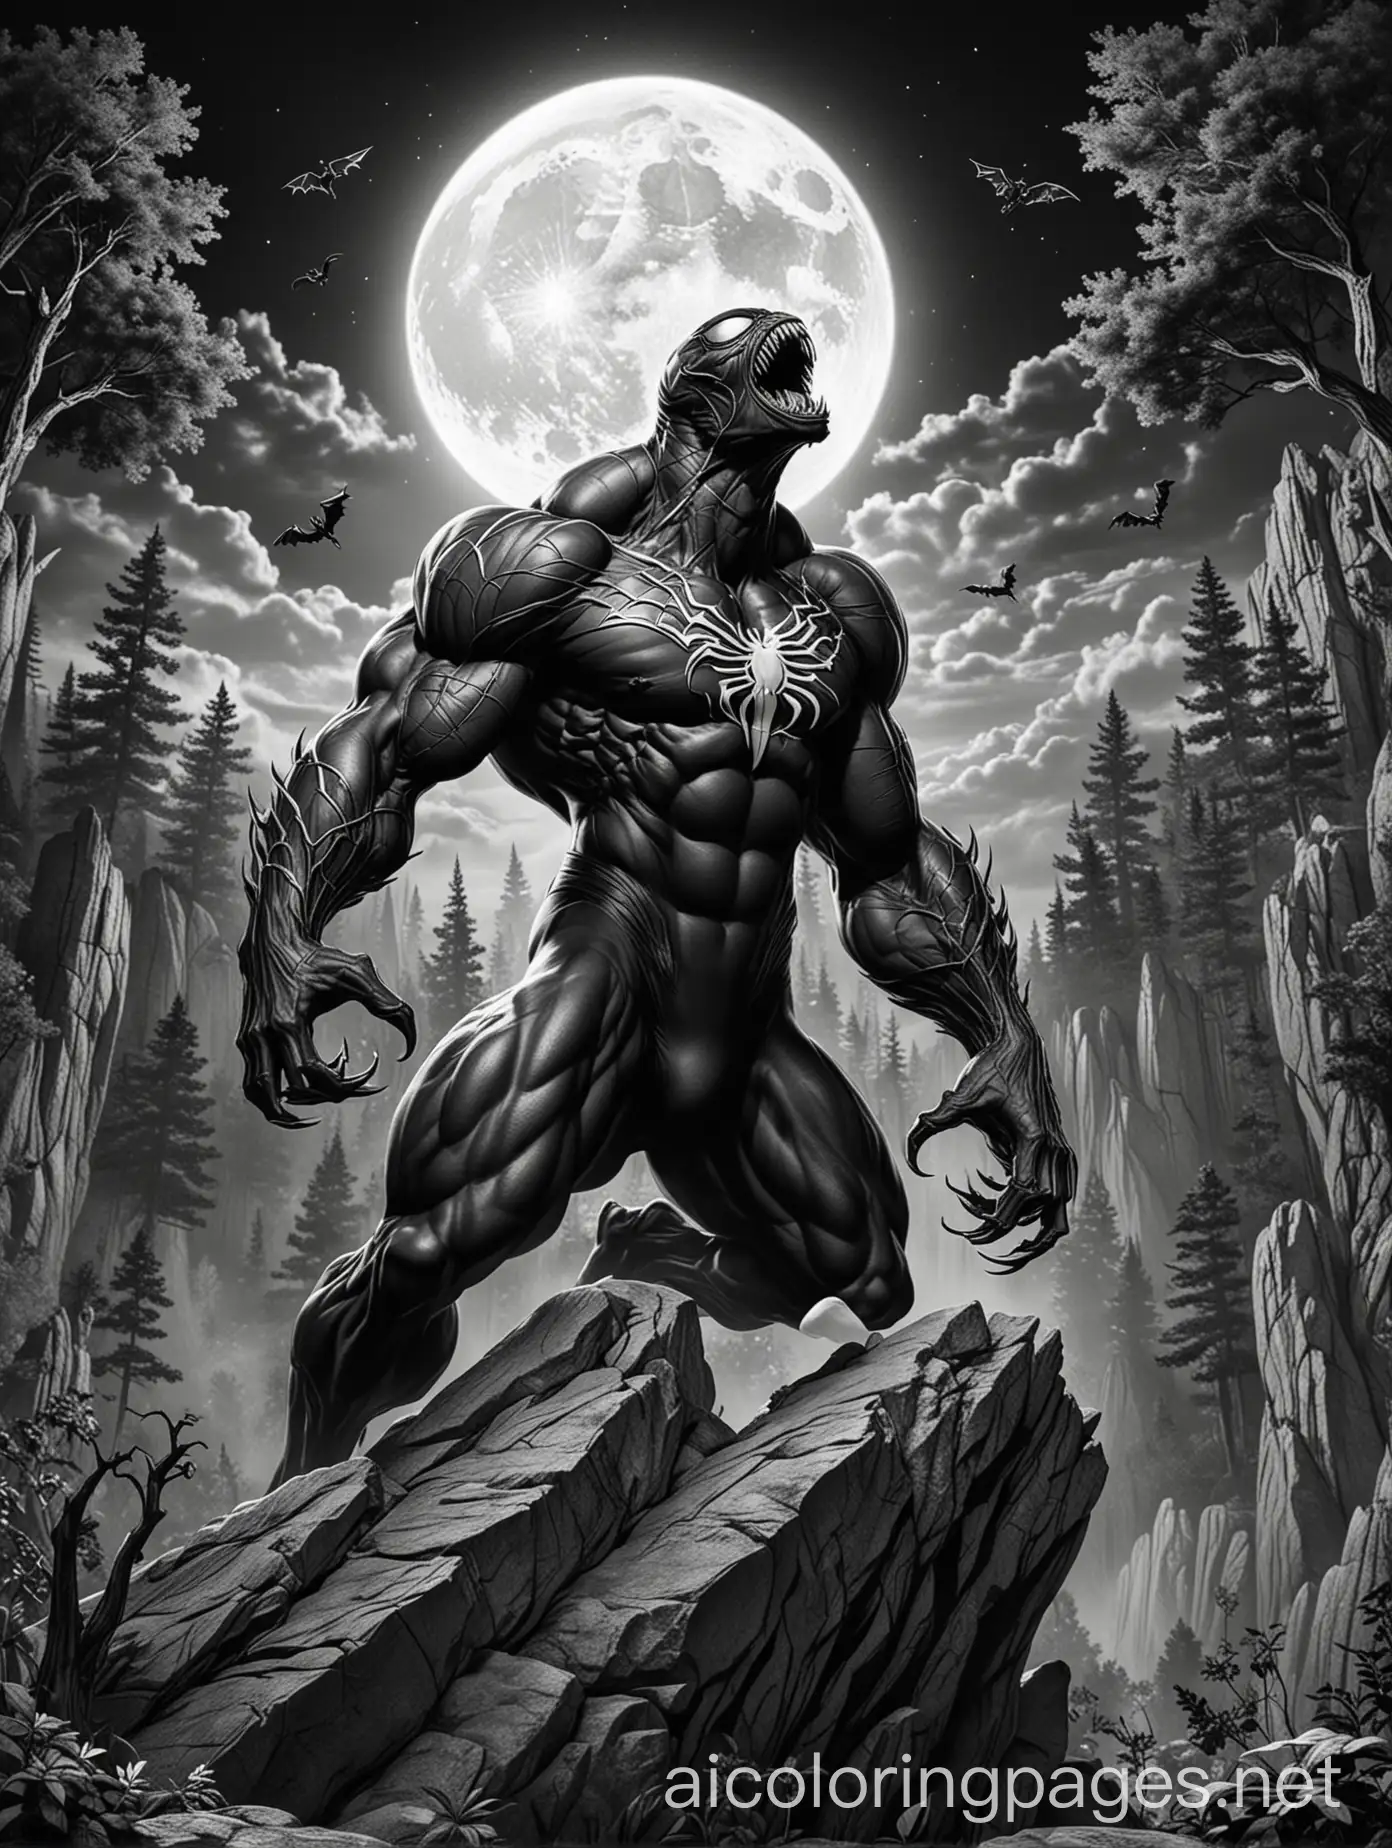 venom from spider-man mixed with a werewolf howling with the full moon in the background on top of a high rock in a forest, Coloring Page, black and white, line art, white background, Simplicity, Ample White Space. The background of the coloring page is plain white to make it easy for young children to color within the lines. The outlines of all the subjects are easy to distinguish, making it simple for kids to color without too much difficulty